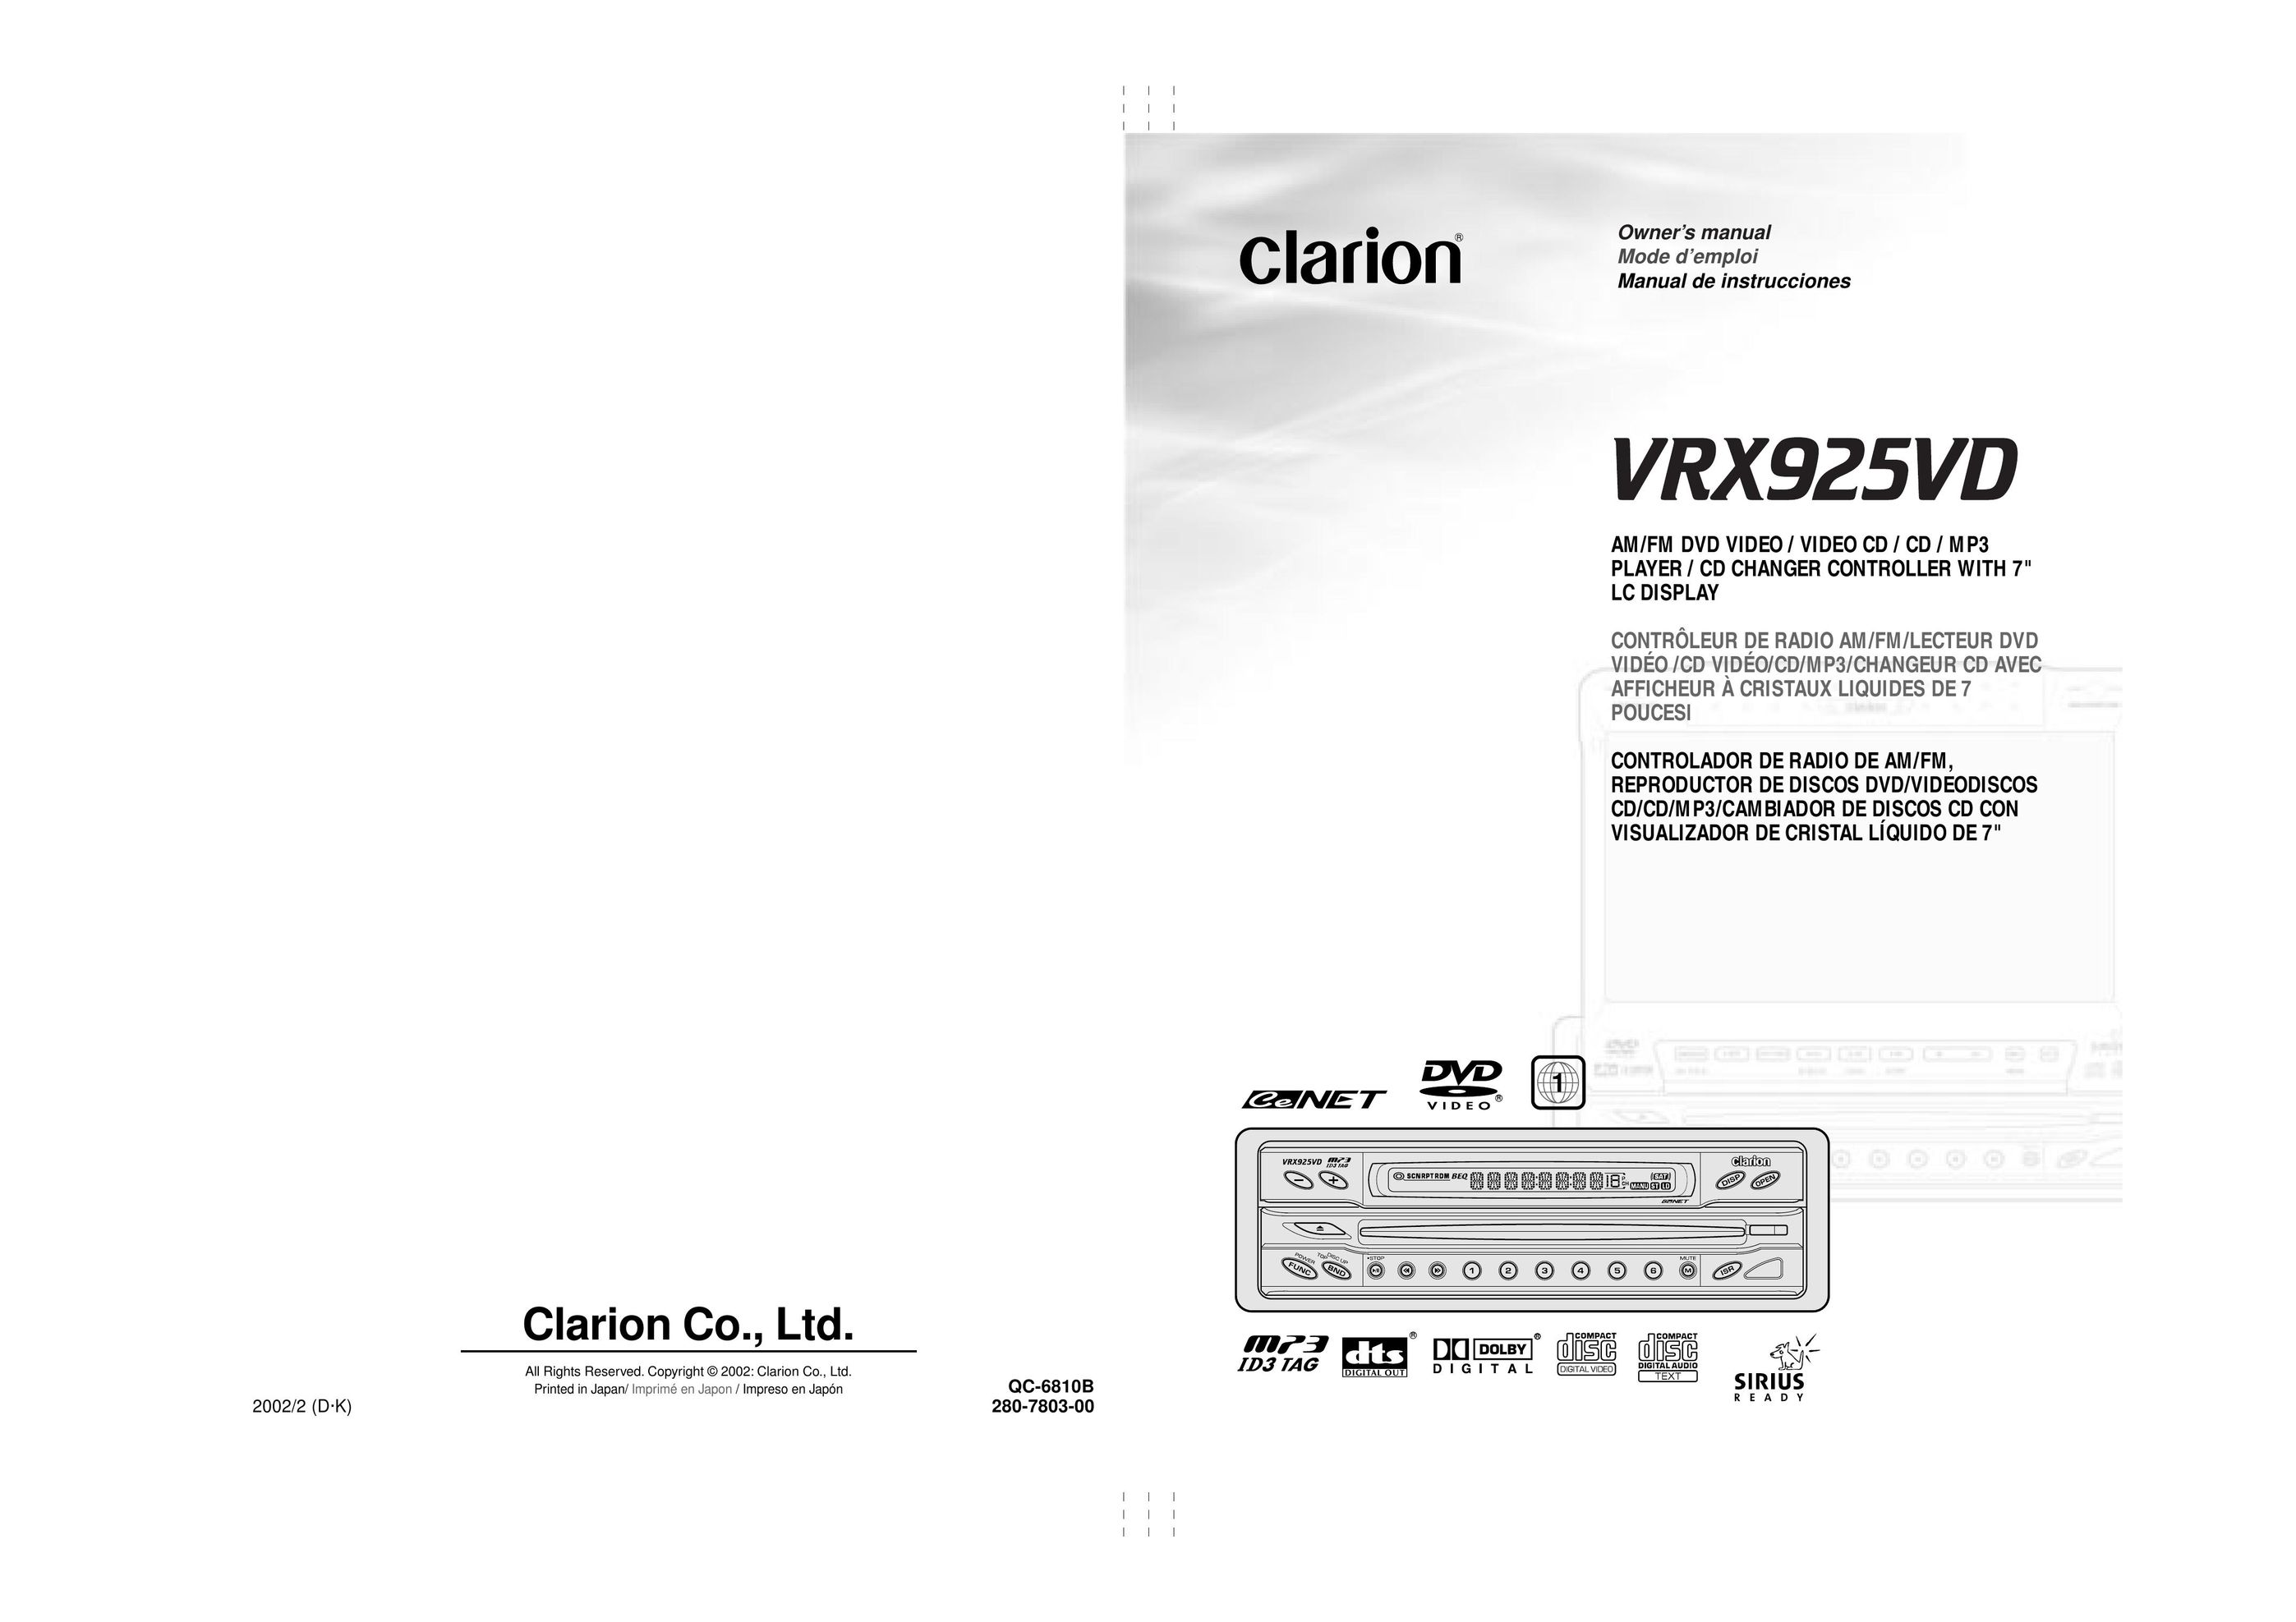 Clarion VRX925VD Car Video System User Manual